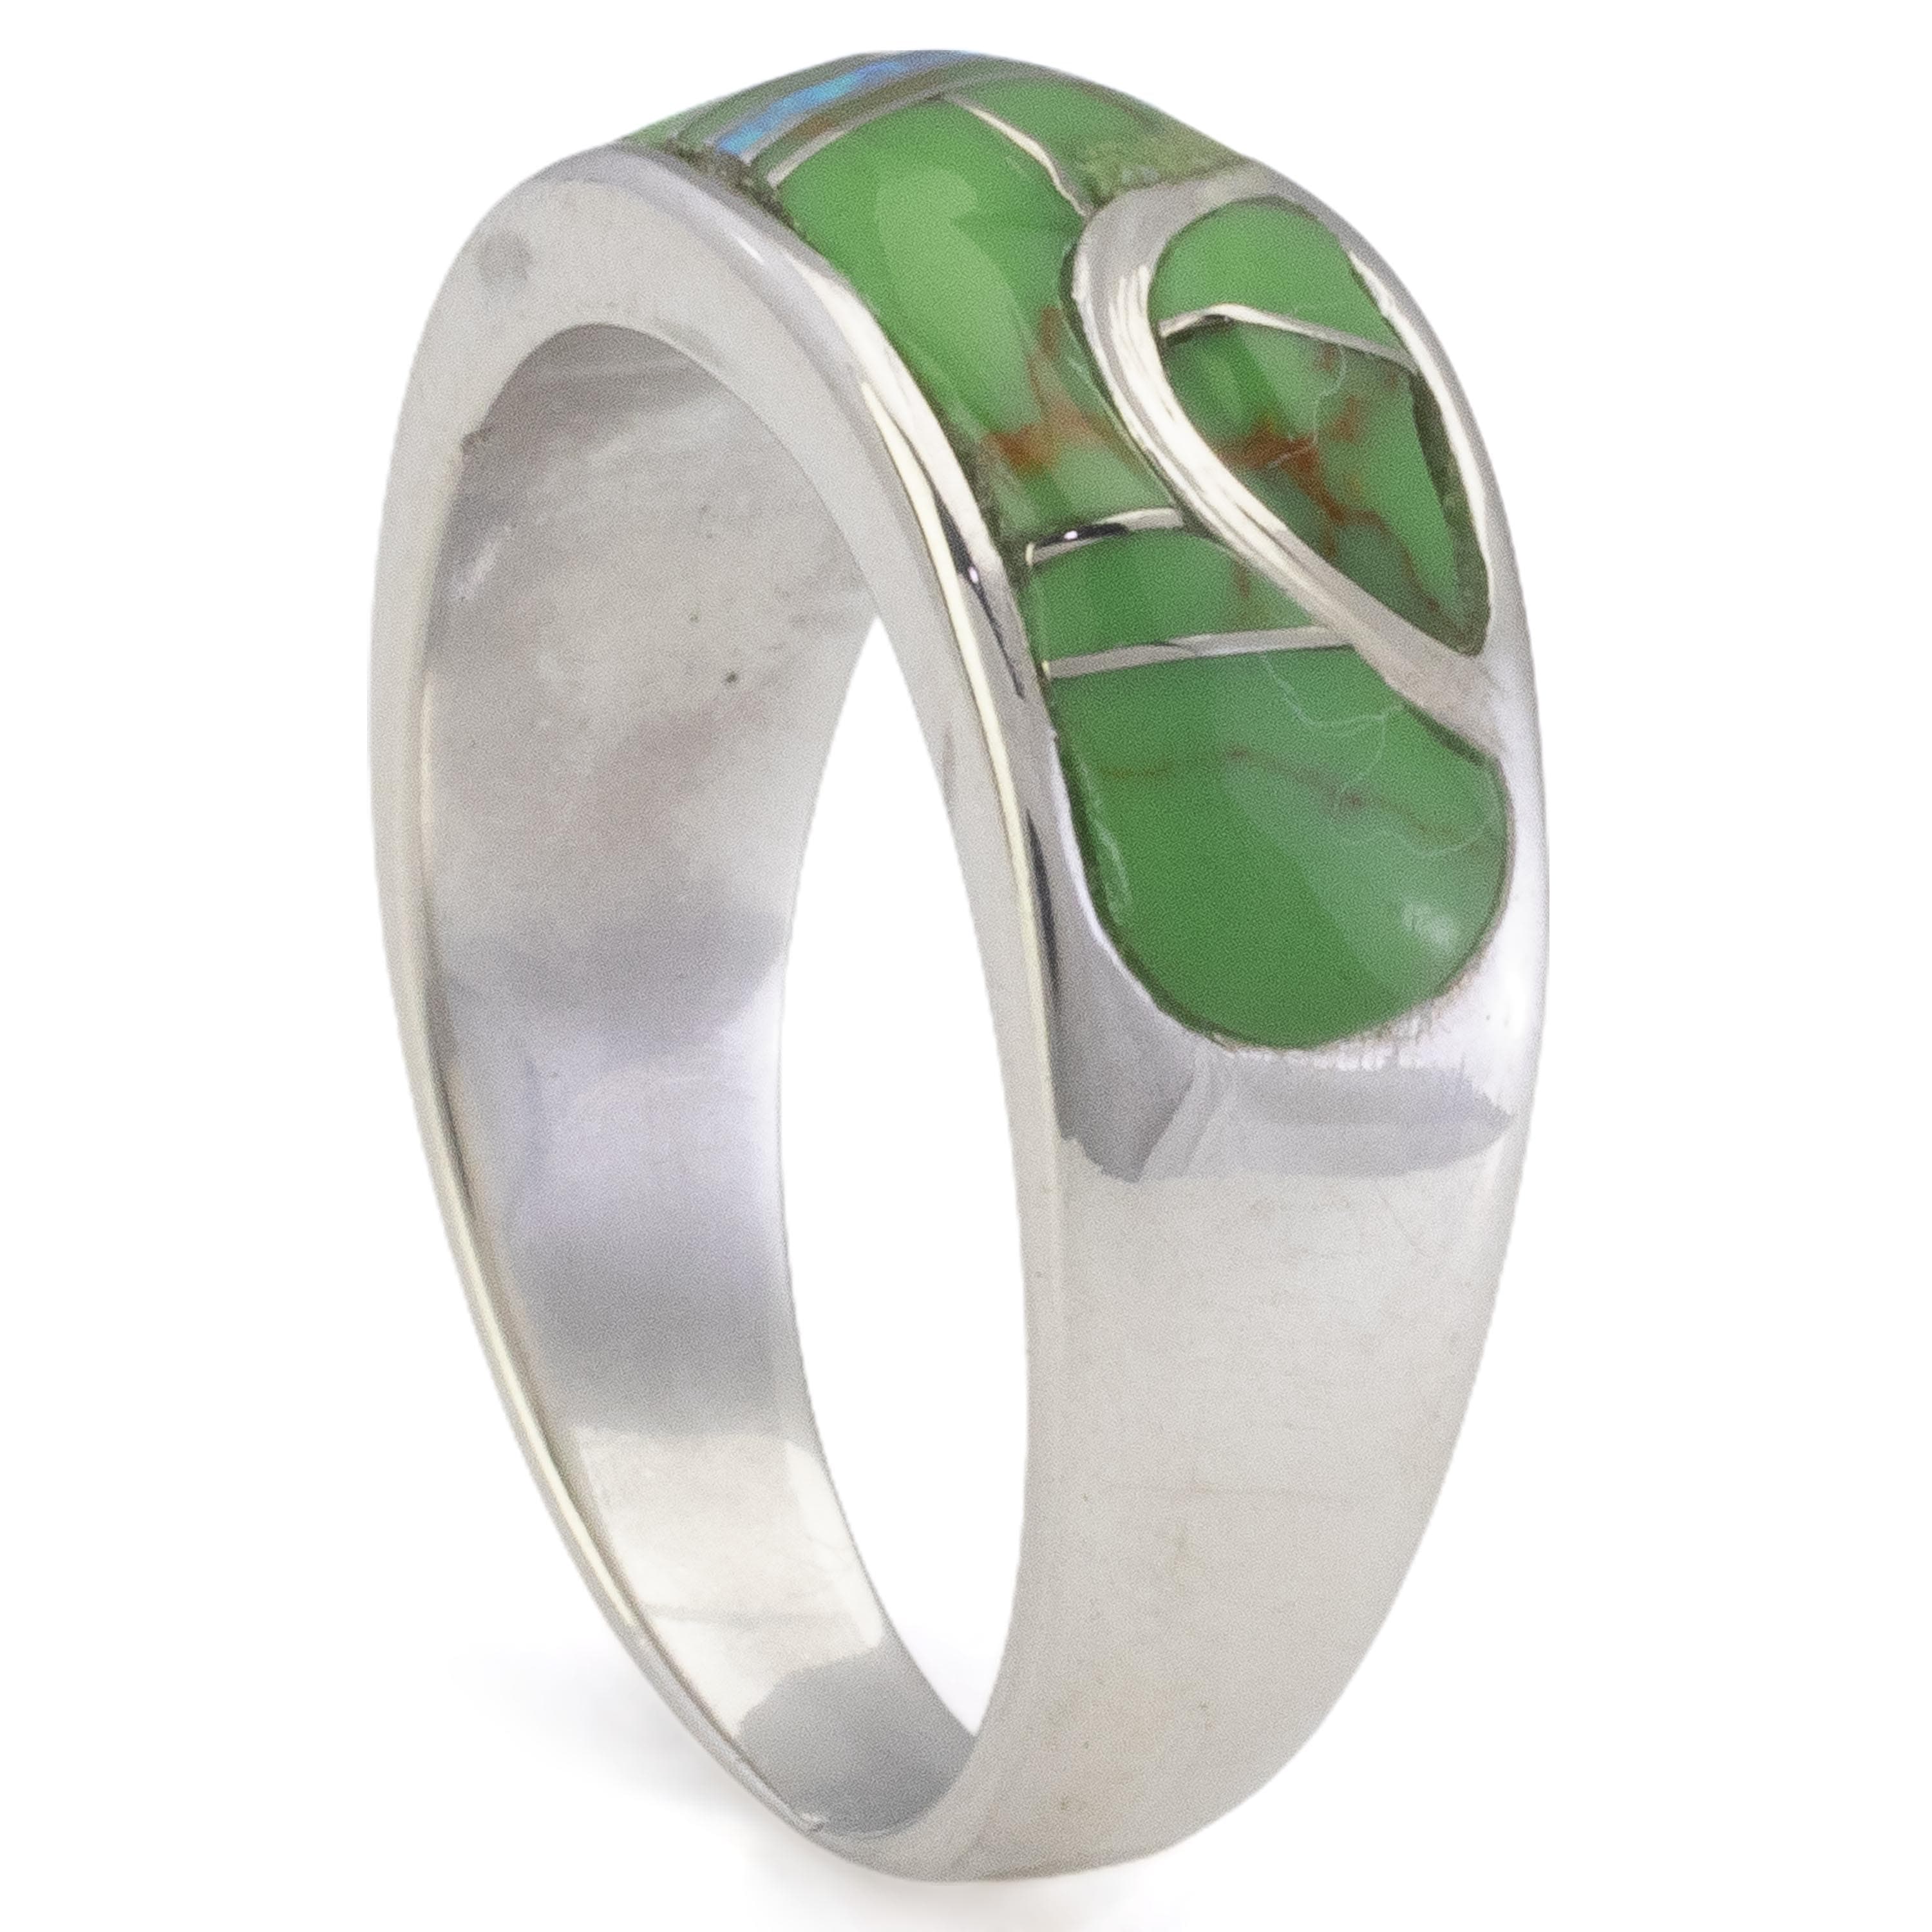 Kalifano Southwest Silver Jewelry Gaspeite 925 Sterling Silver Ring Handmade with Laboratory Opal Accent